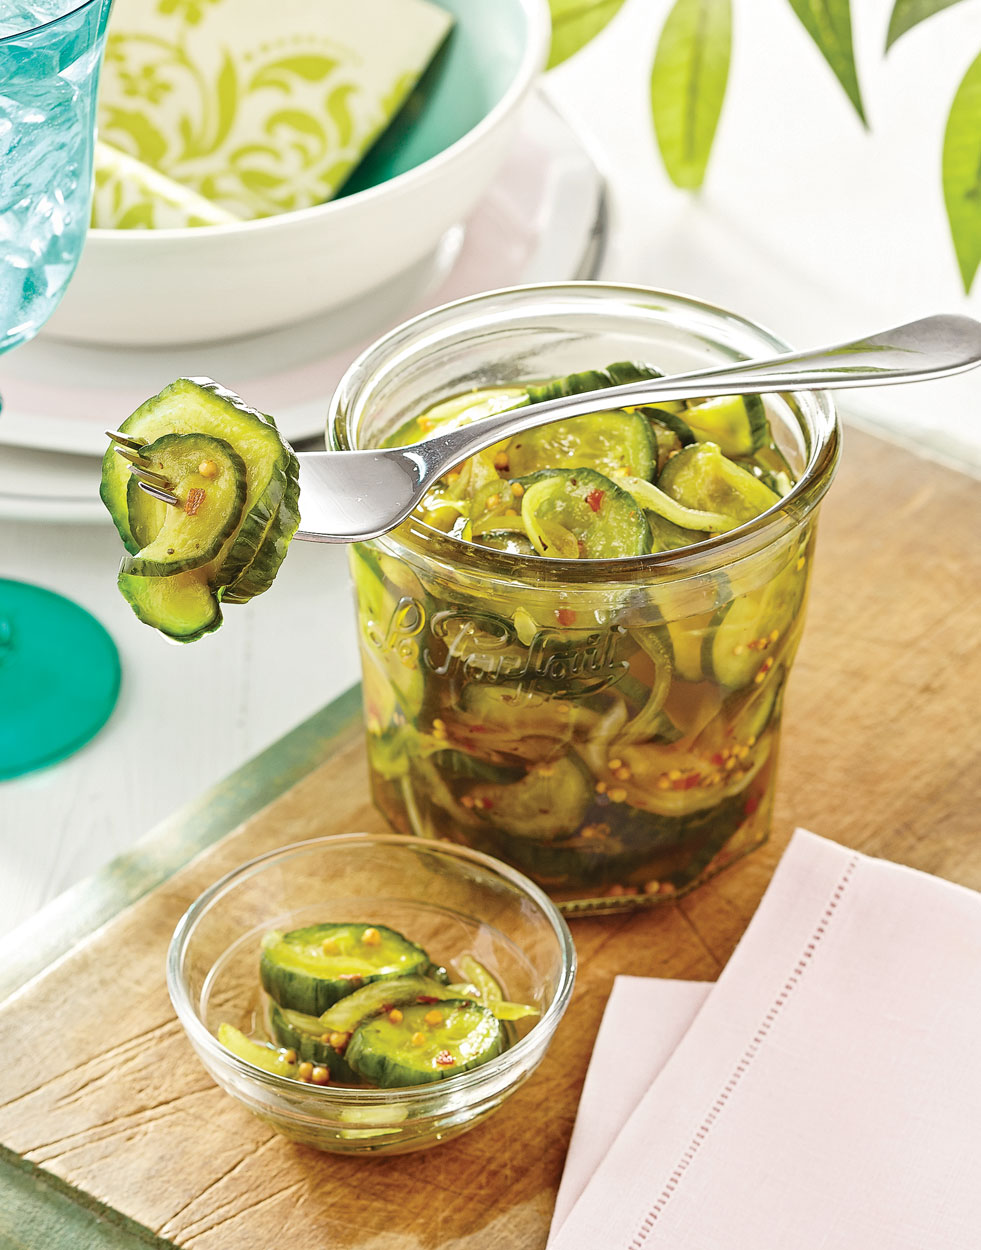 Bread-and-Butter Pickles Recipe